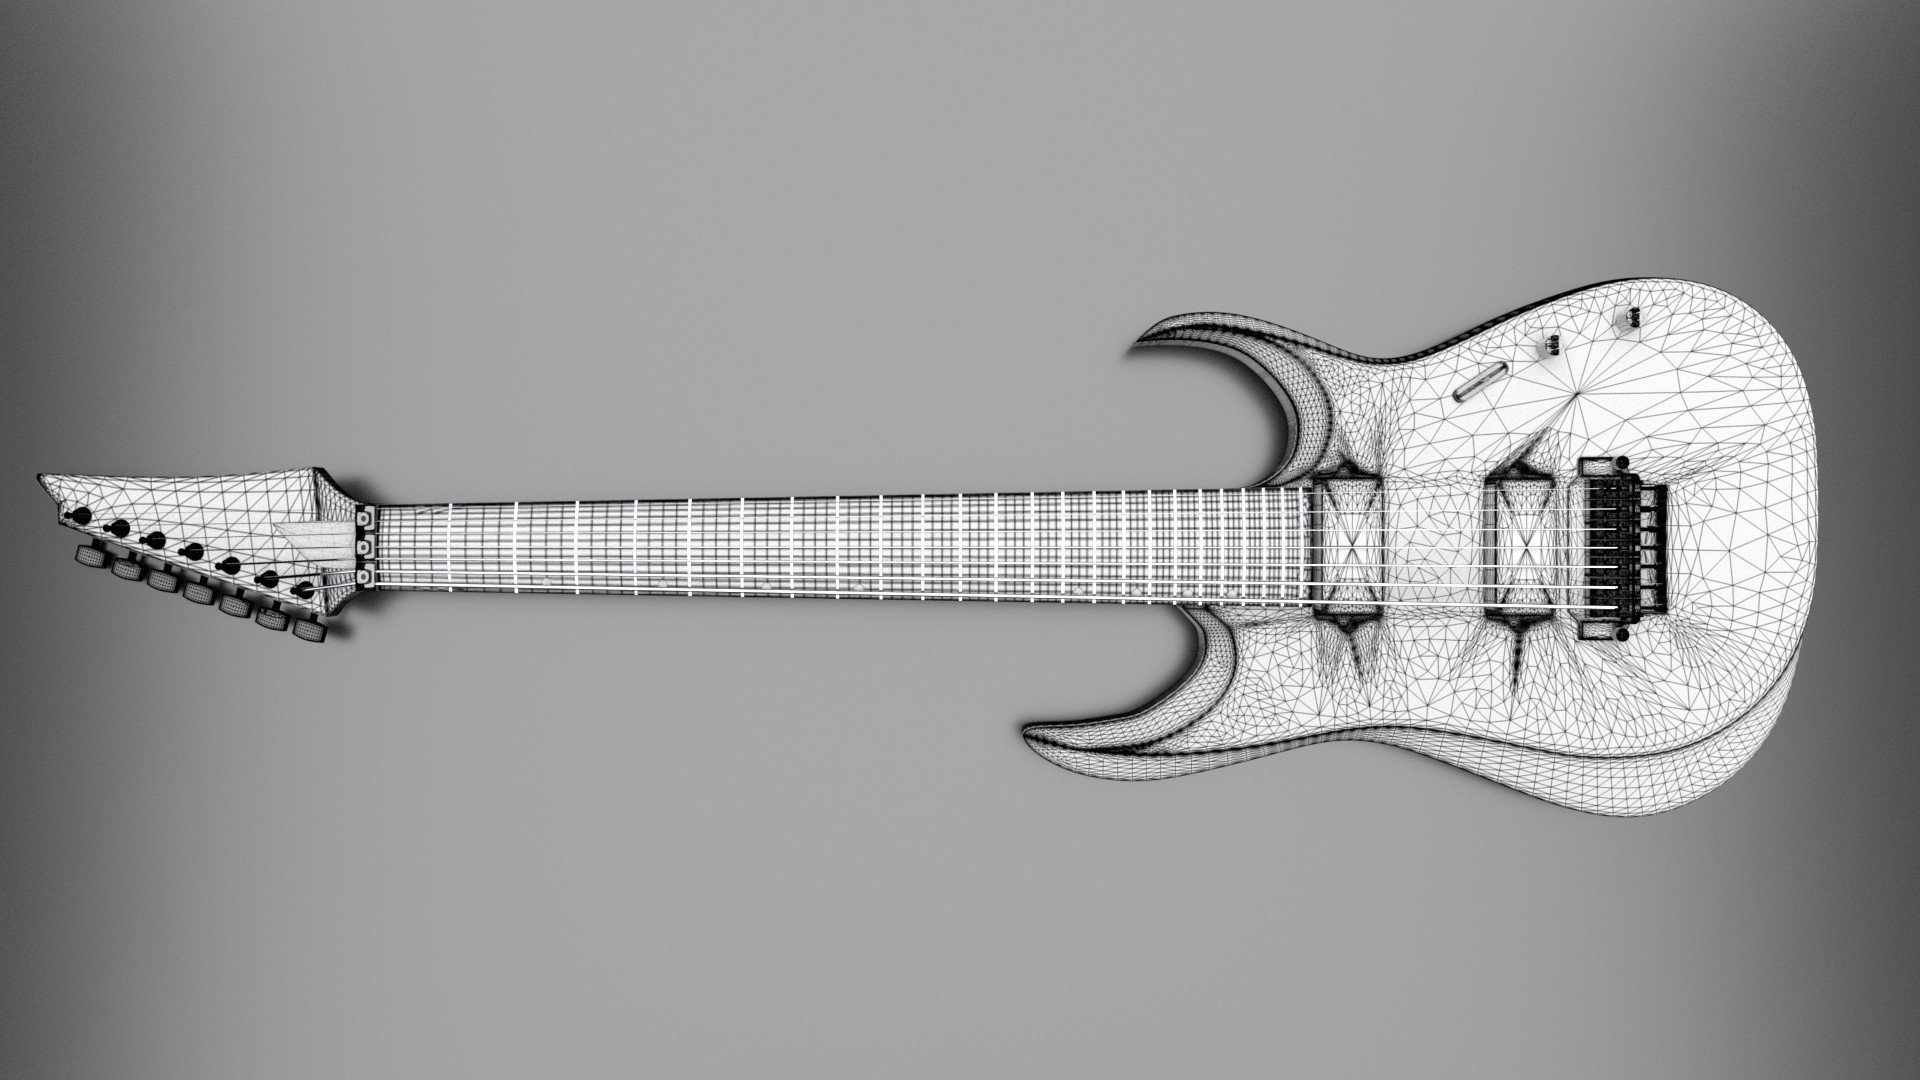 Ibanez 7 String Electric Guitar   3D Model by Agungkuncoro 1920x1080